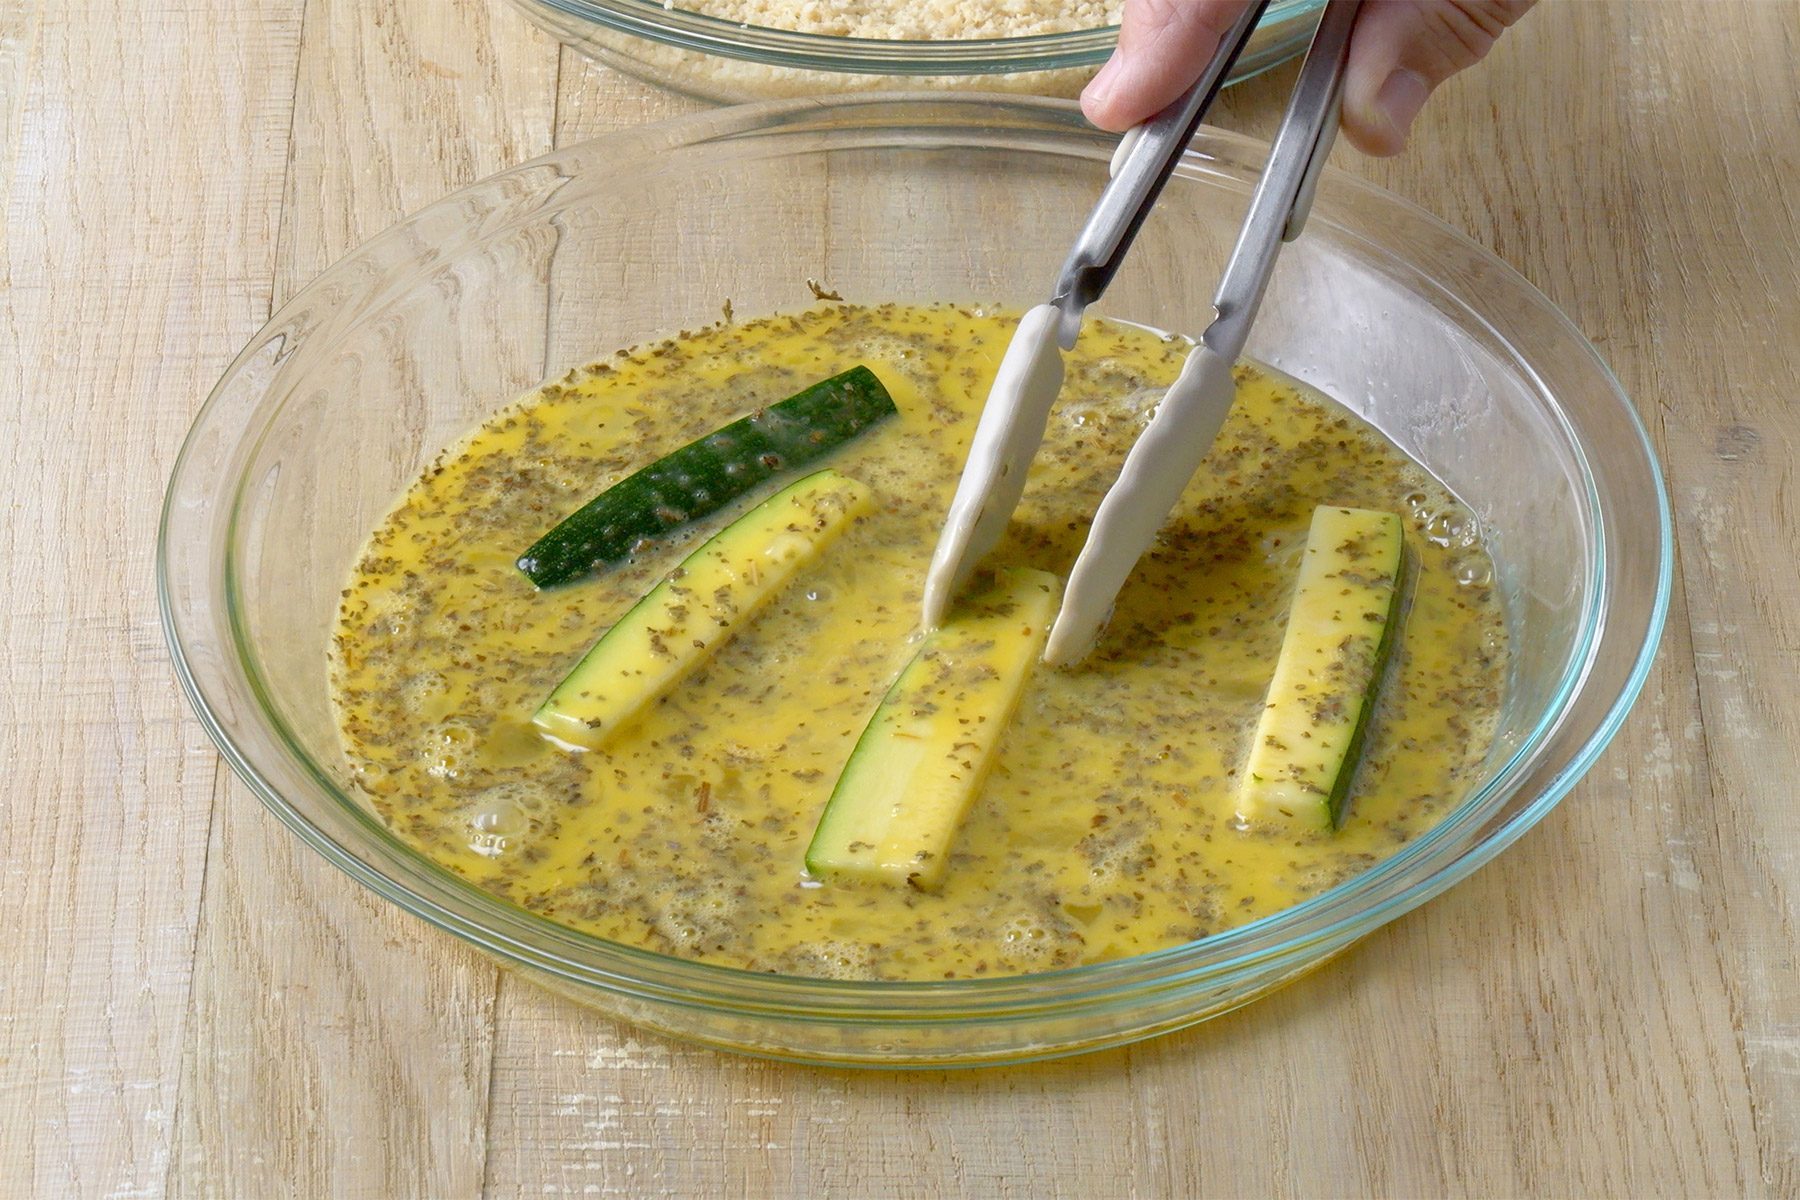 wide shot of zucchini slices dipped in egg mixture